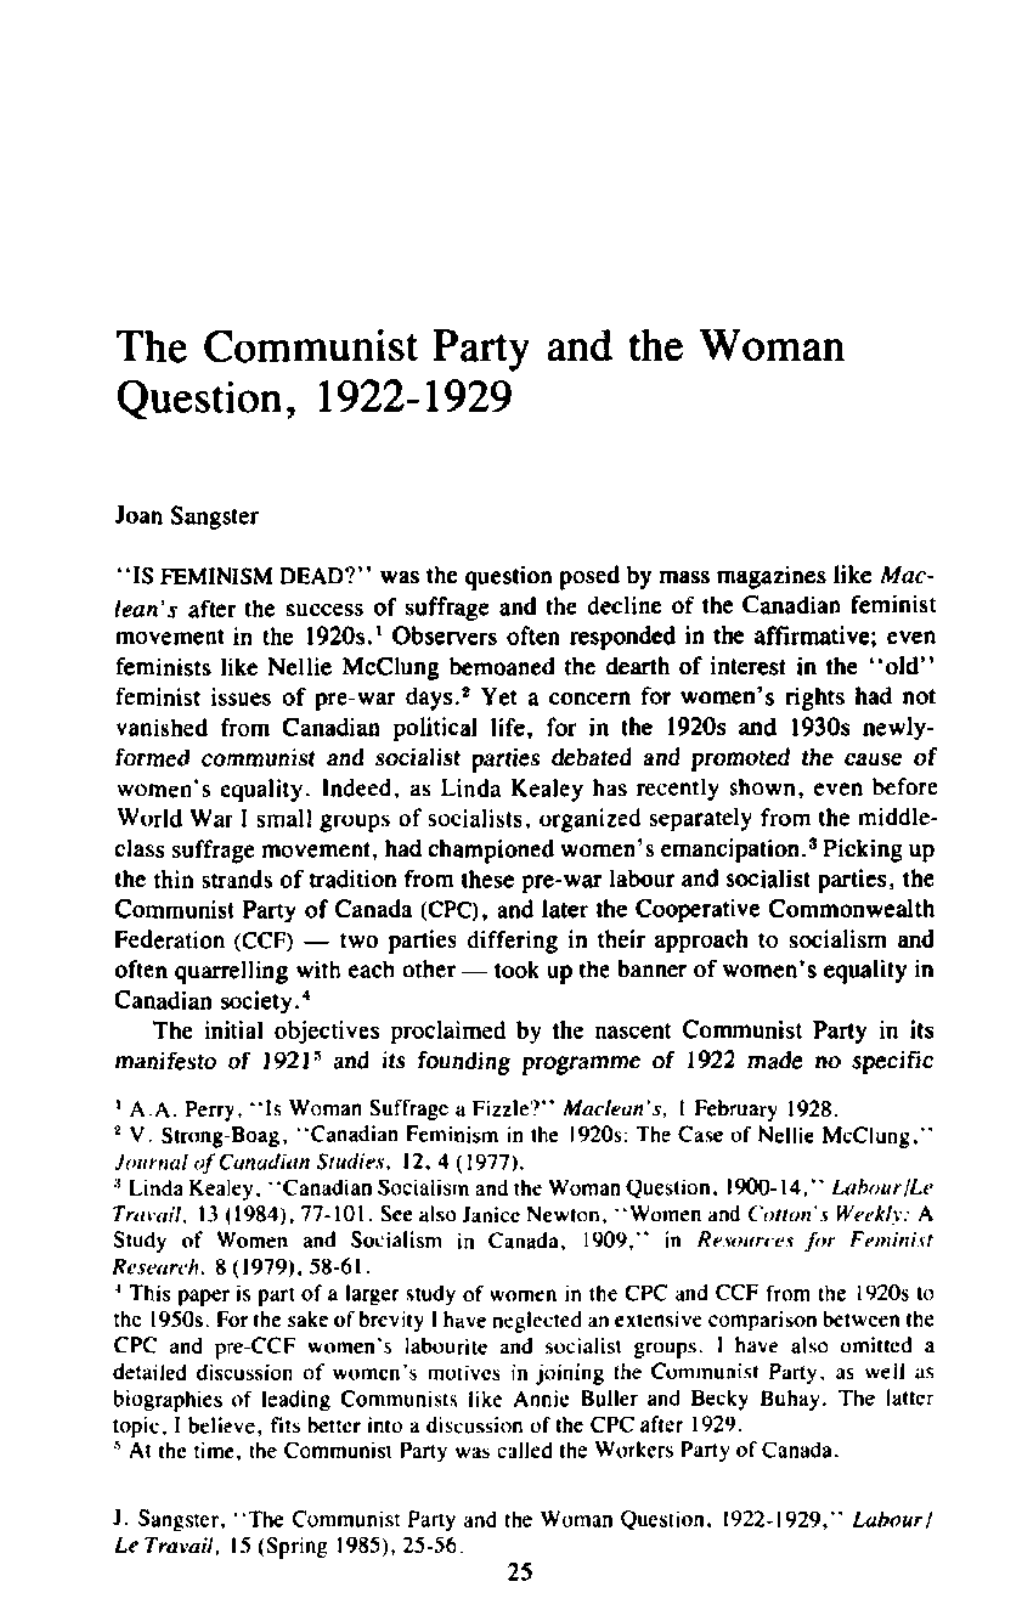 The Communist Party and the Woman Question, 1922-1929